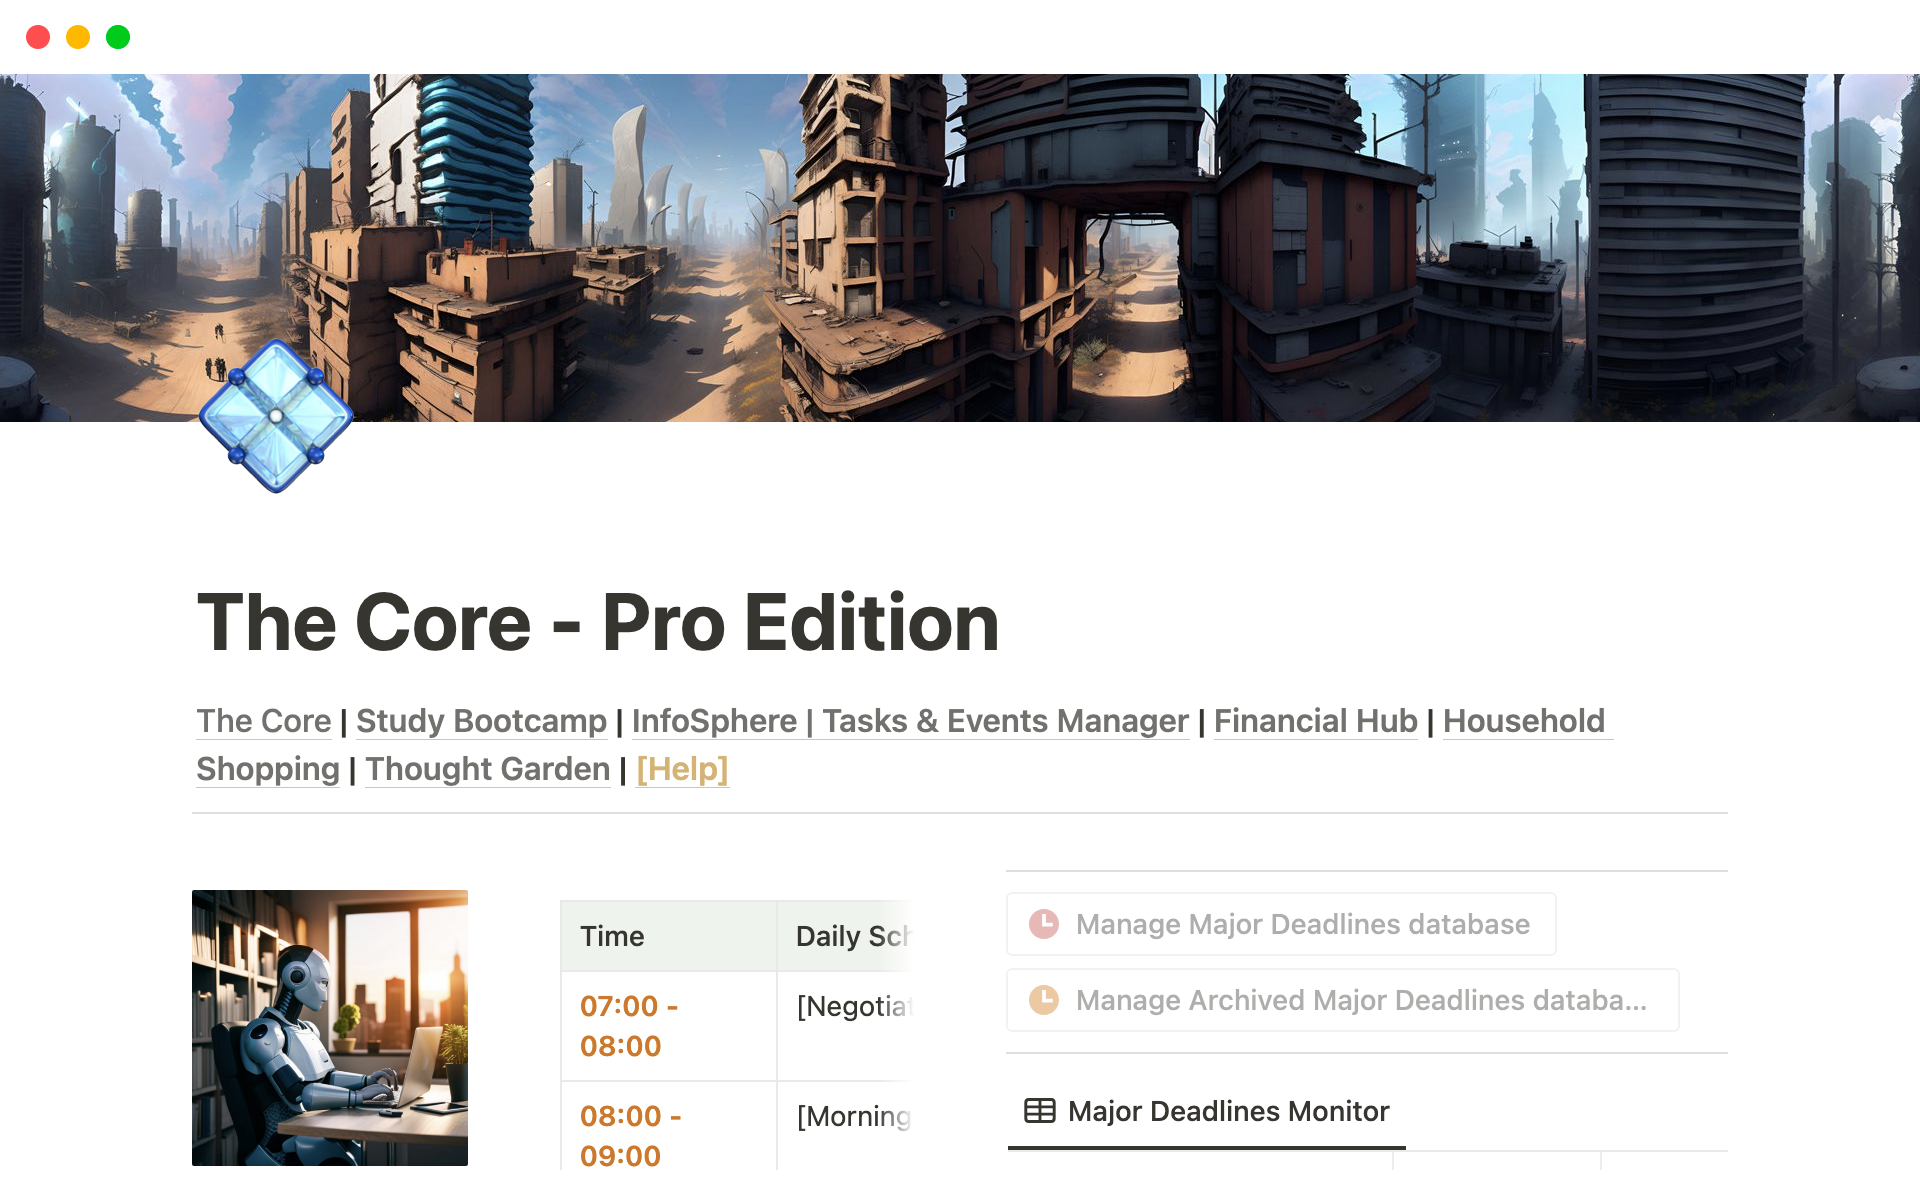 The Pro Edition of 'The Core' is a step up from the Student Edition, tailored for the comprehensive lifestyle management.